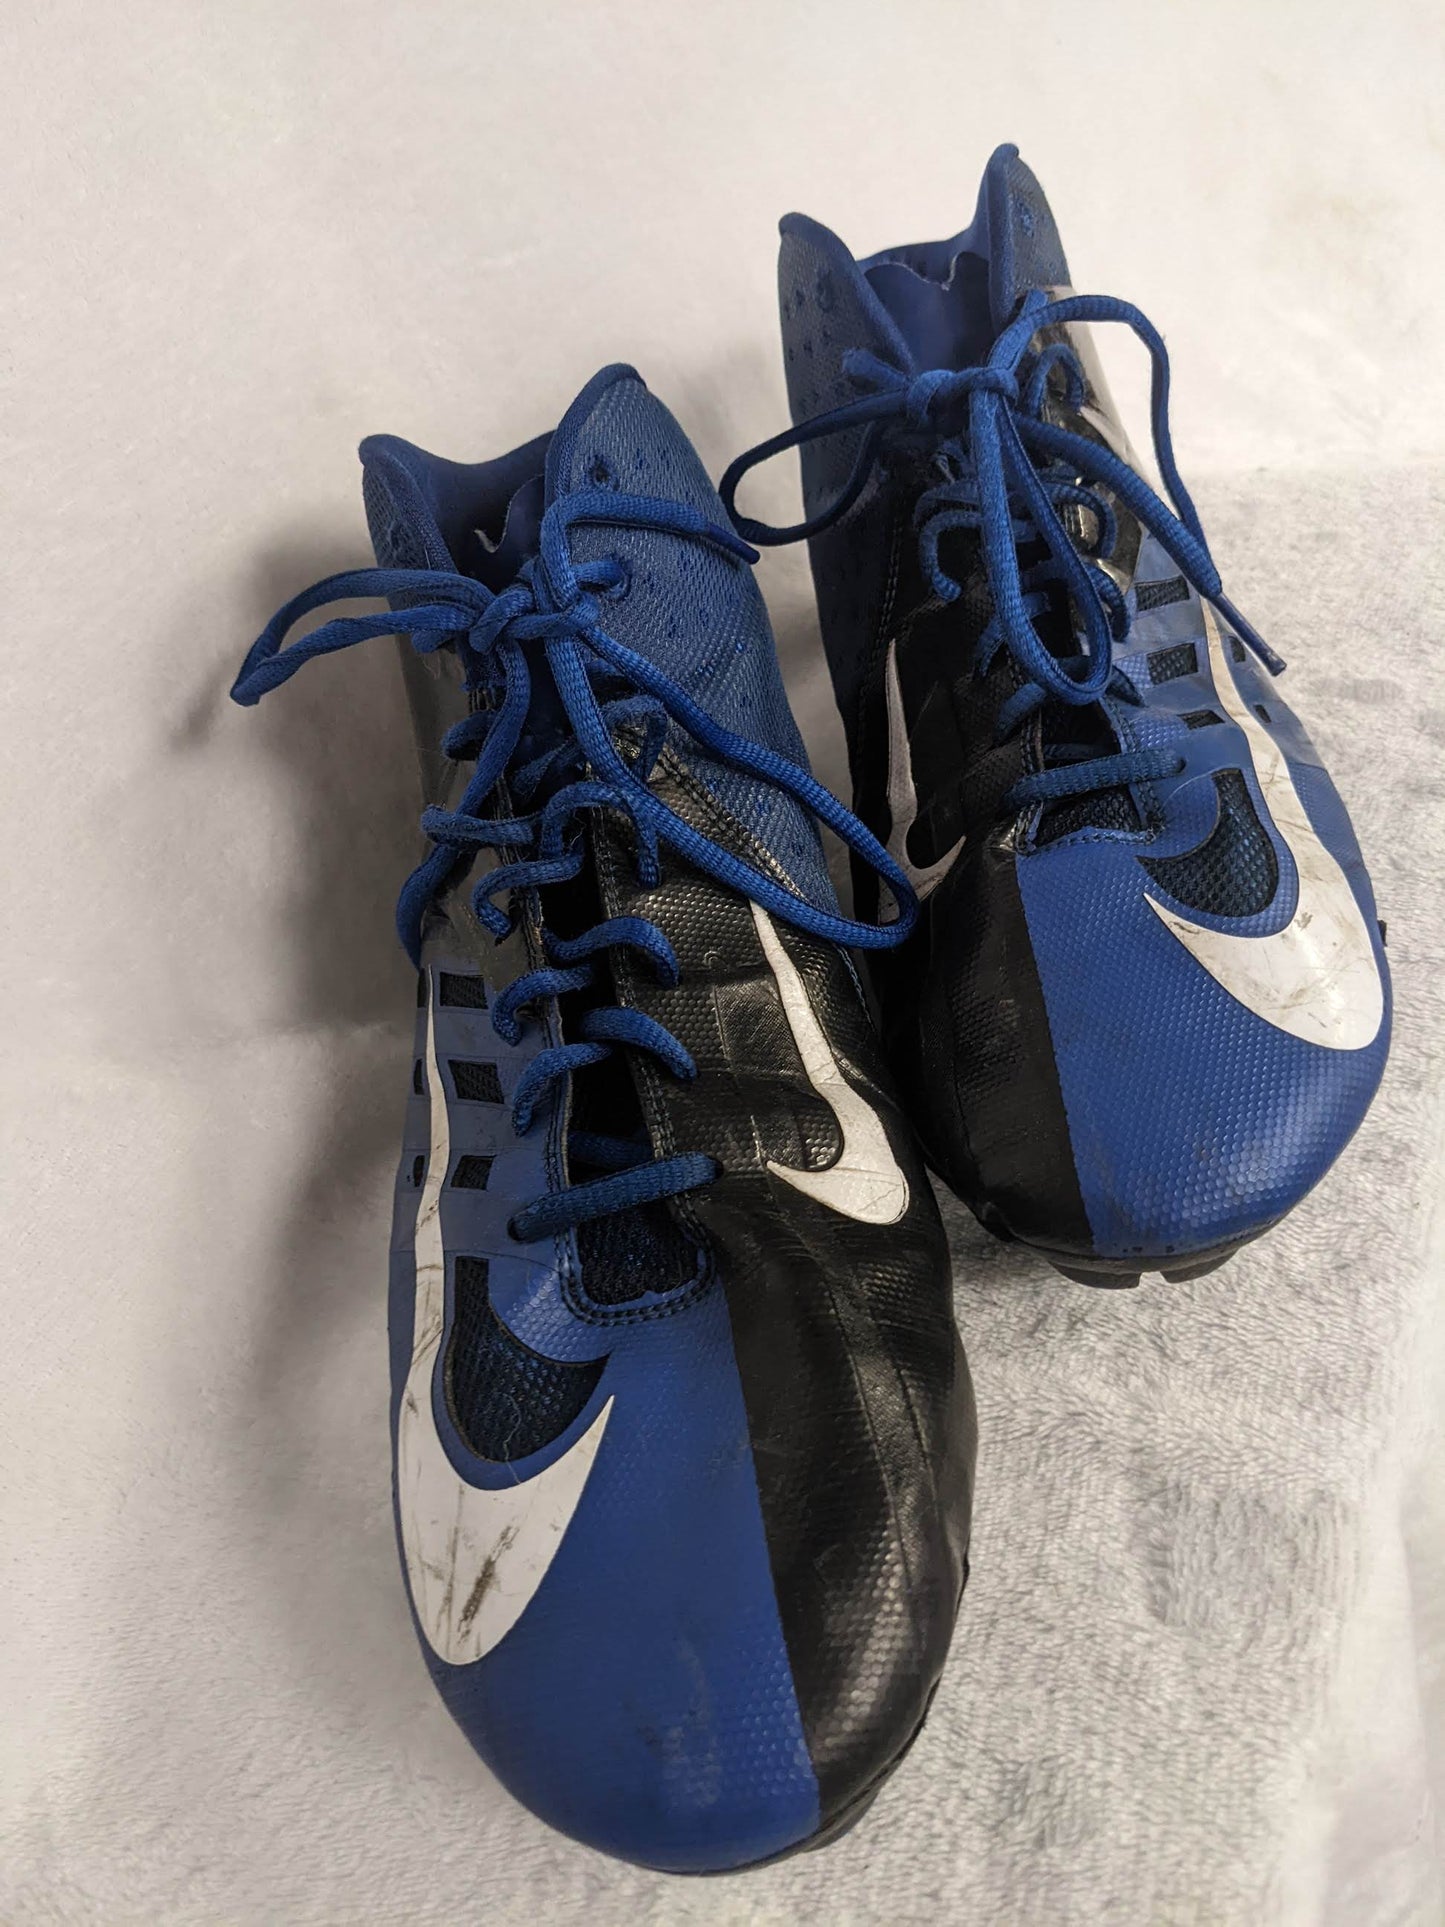 Nike Vapor Pro Cleats Size 13 Color Blue Condition Used